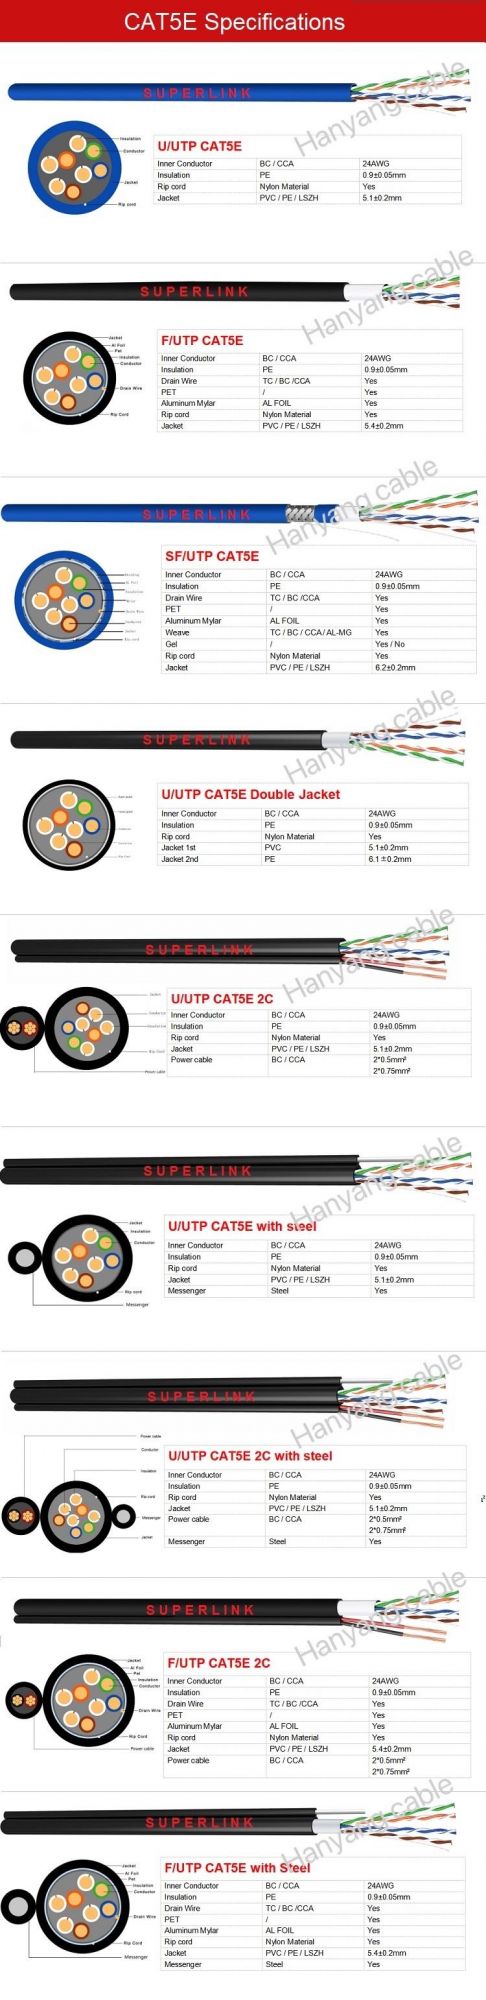 Manufactory LAN Cable UTP FTP SFTP Cat5e 2c CAT6 2c 0.53mm 0.57mm 23AWG Communication Cable Ethernet